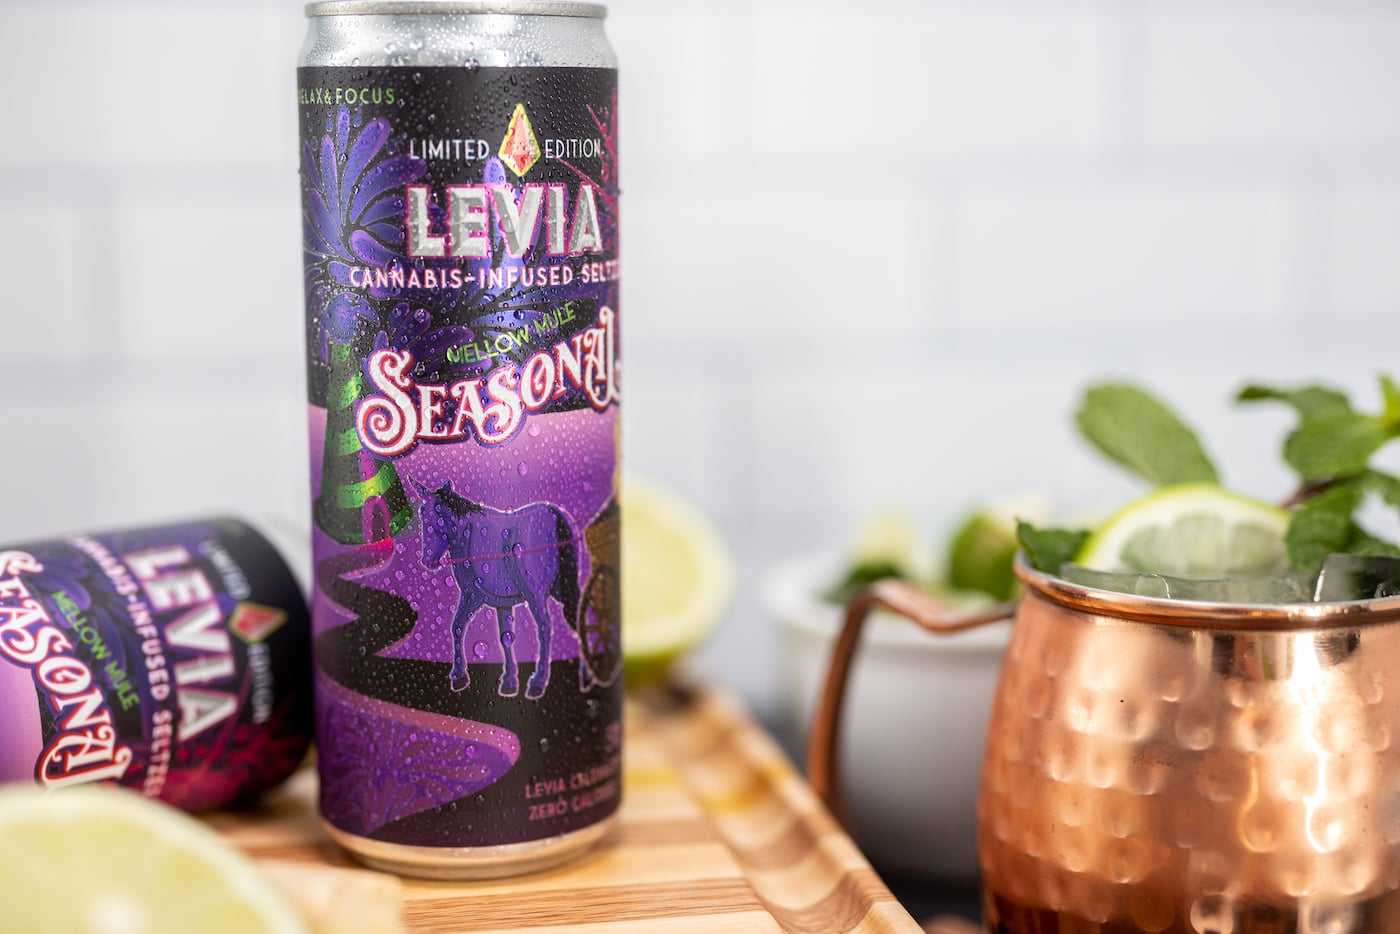 LEVIA Cannabis Infused Seltzer Celebrates 4/20 with Launch of New Limited-Edition Flavor